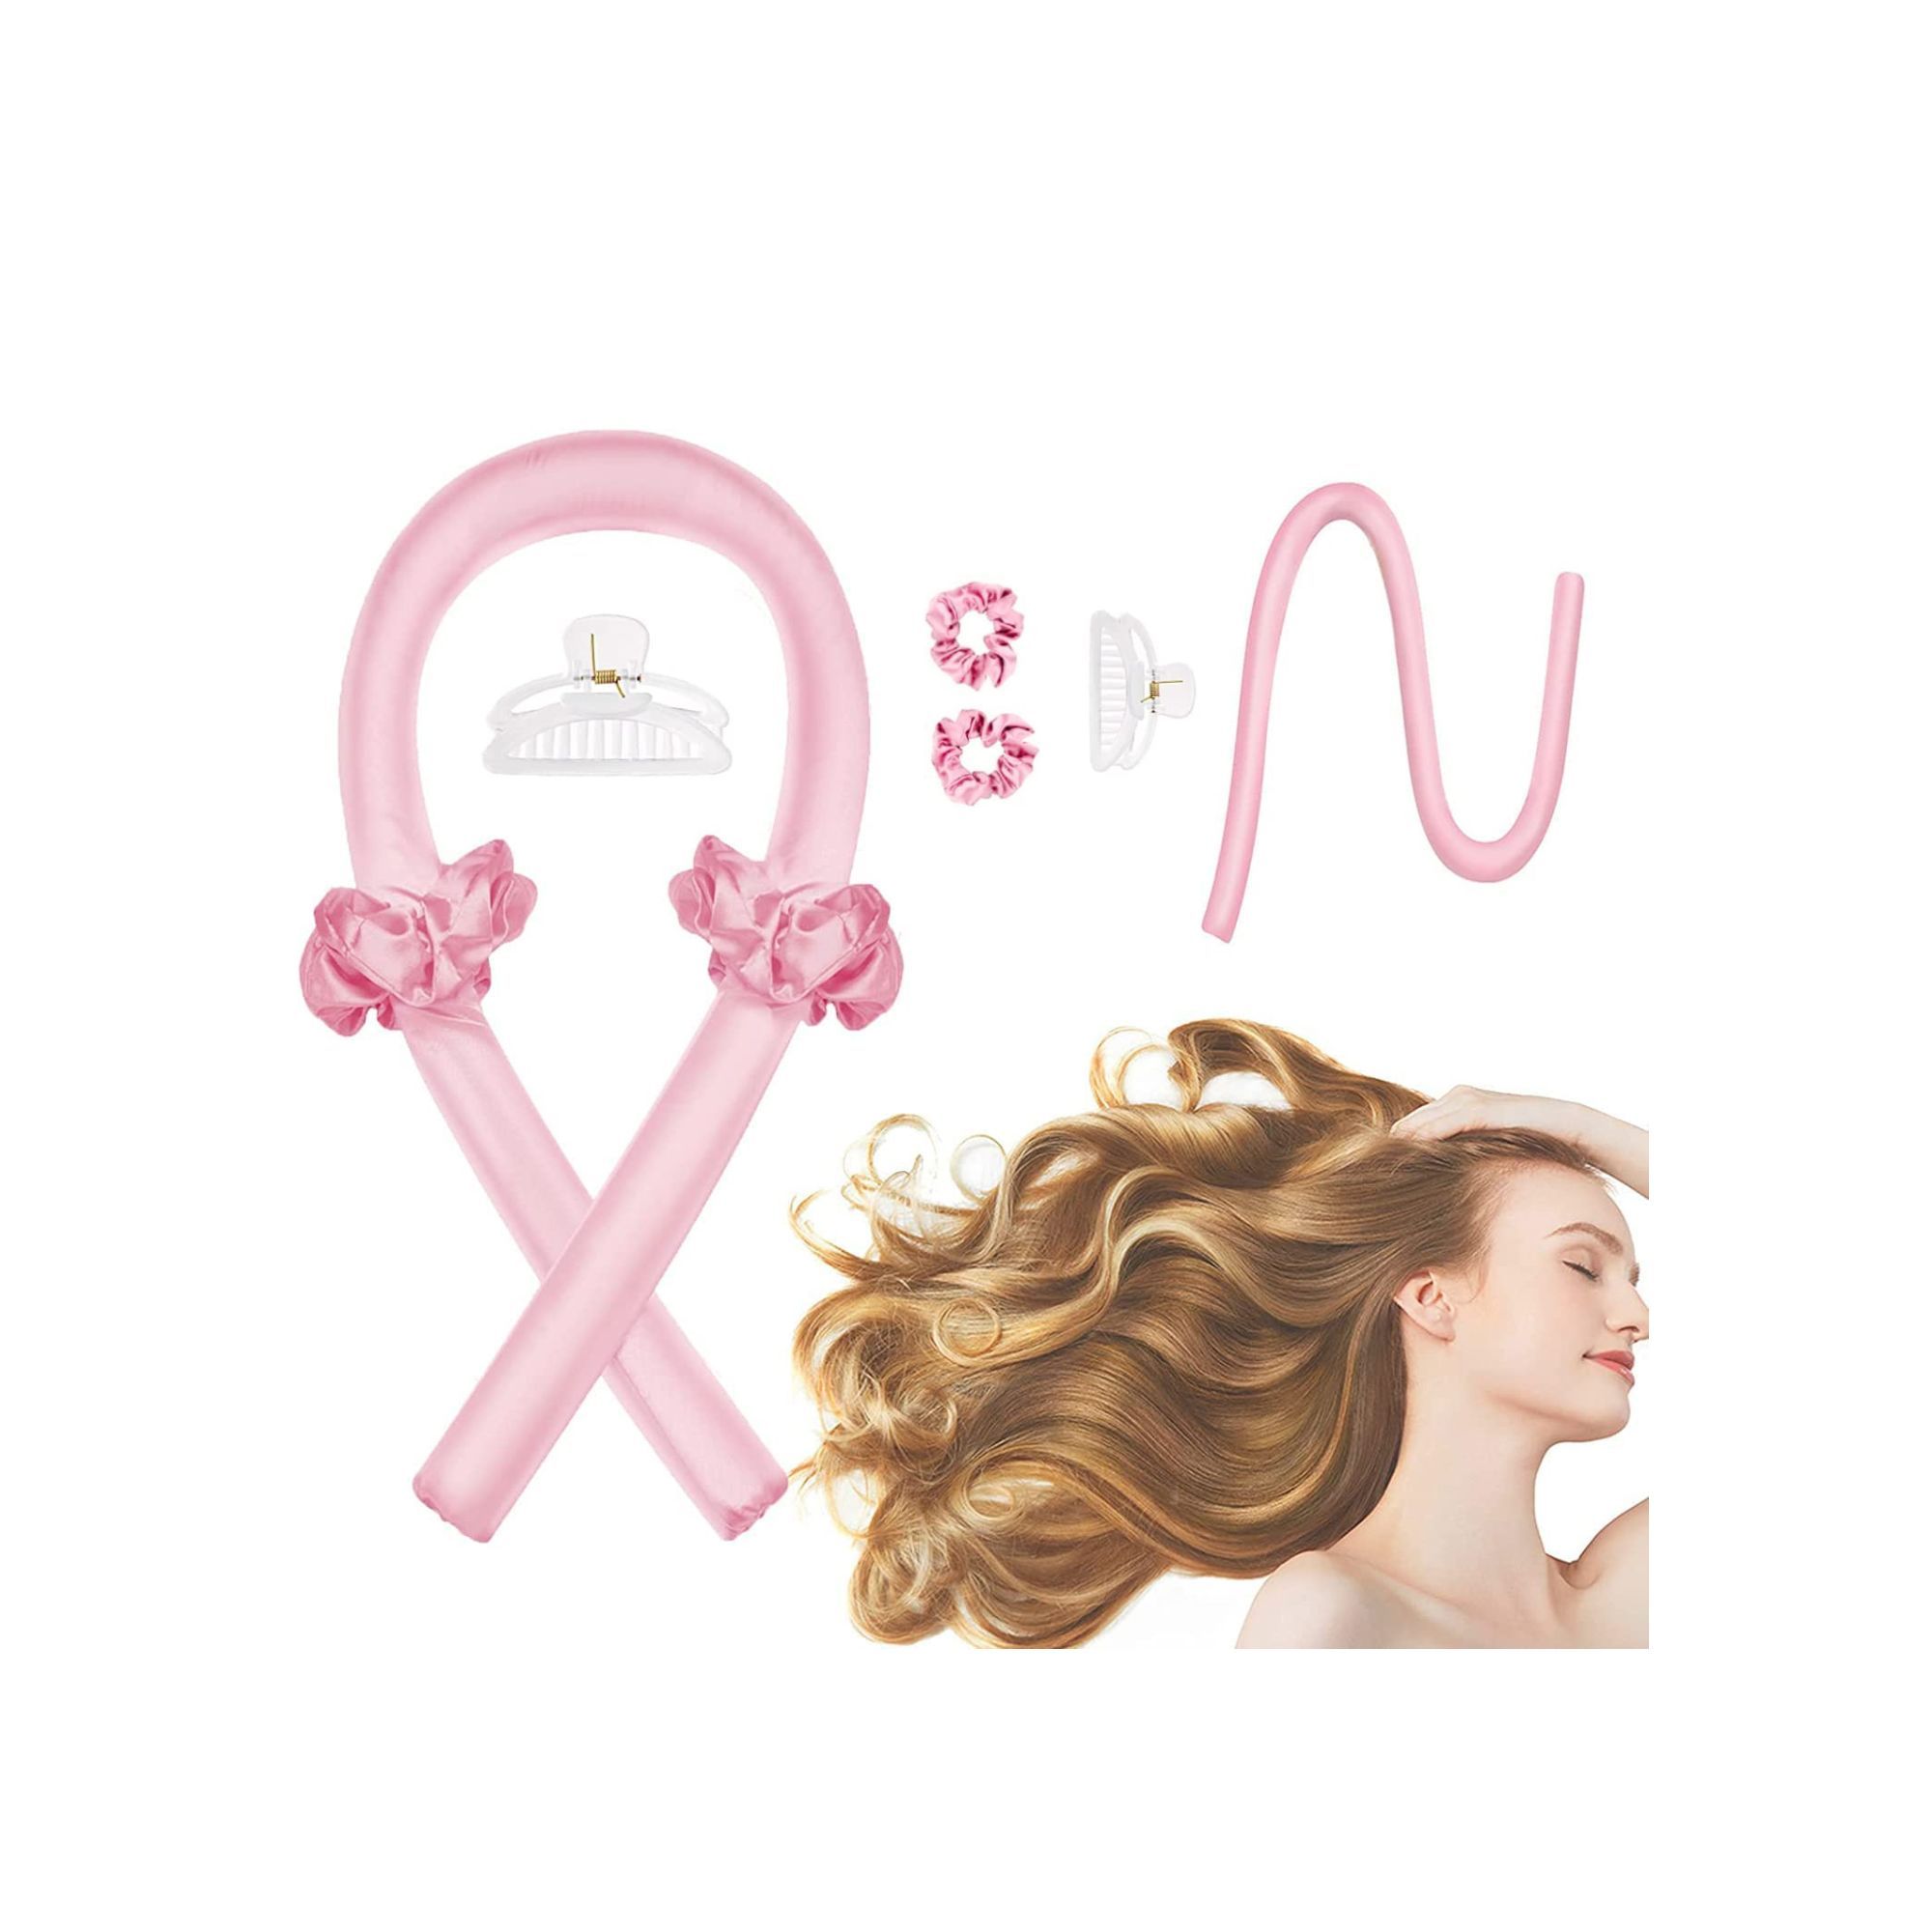 Heatless Hair Curlers for Your Tresses